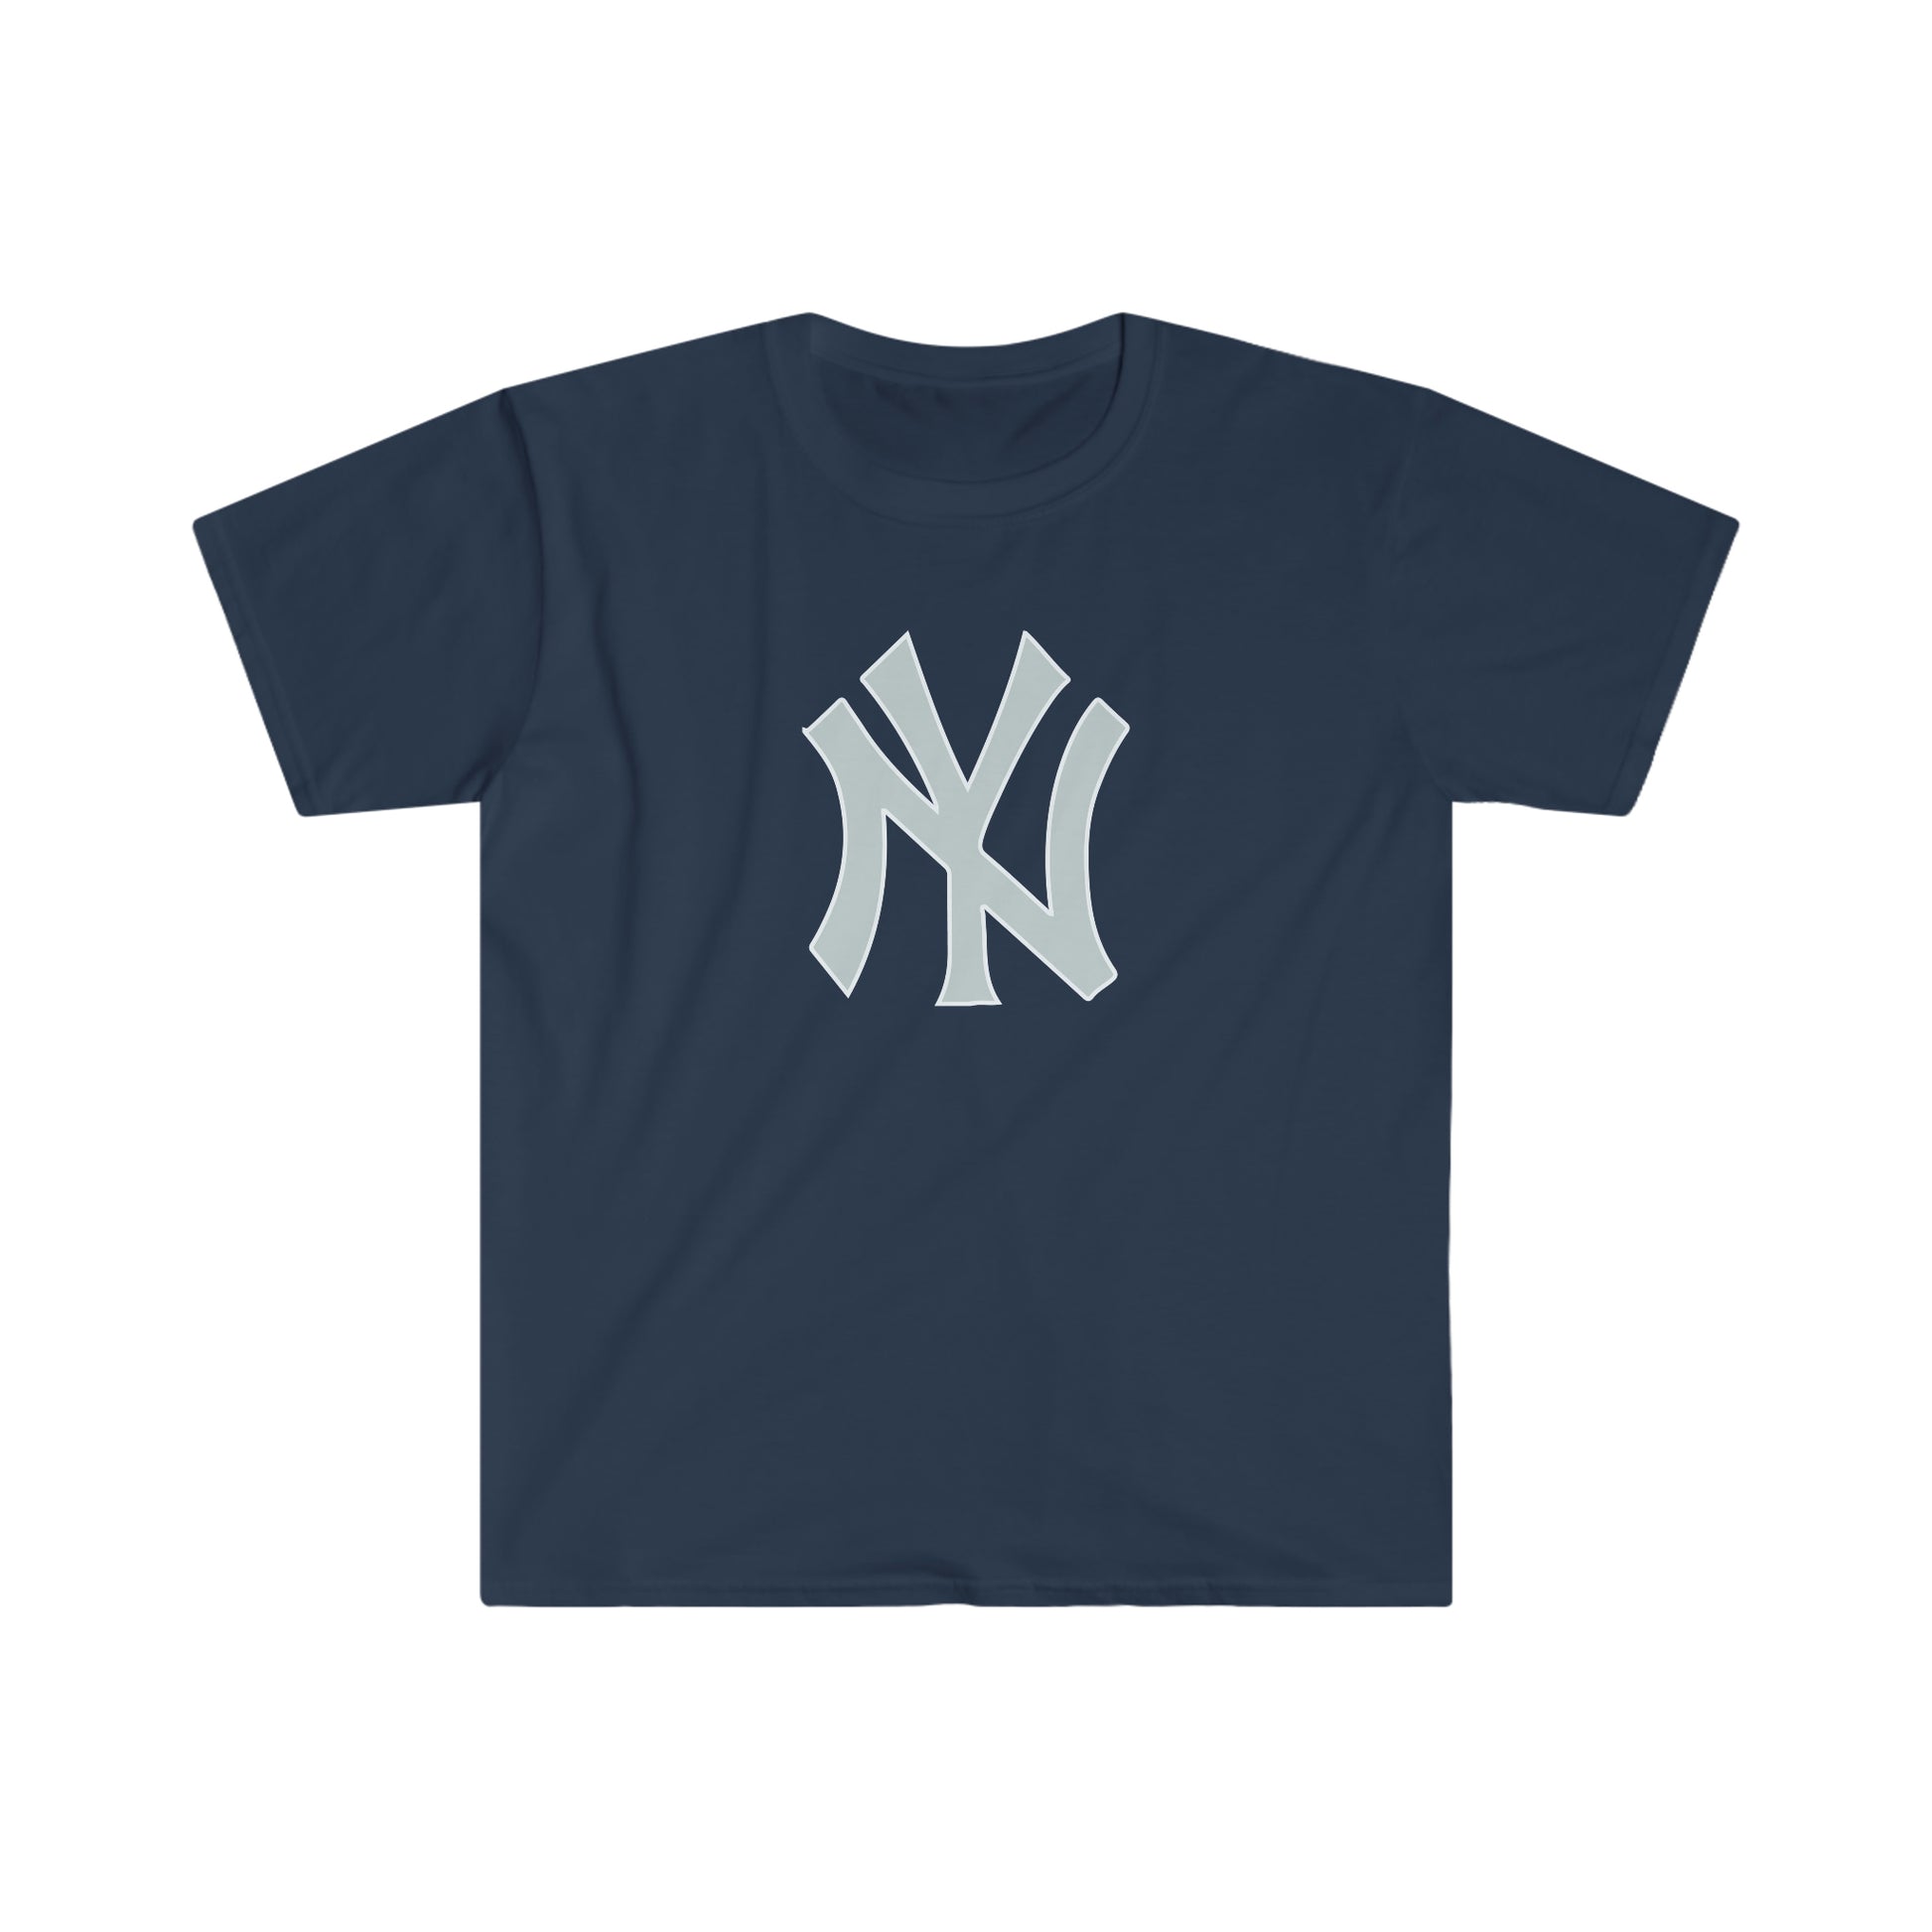 Anthony Rizzo New York Yankees King Of The Short Porch Shirt